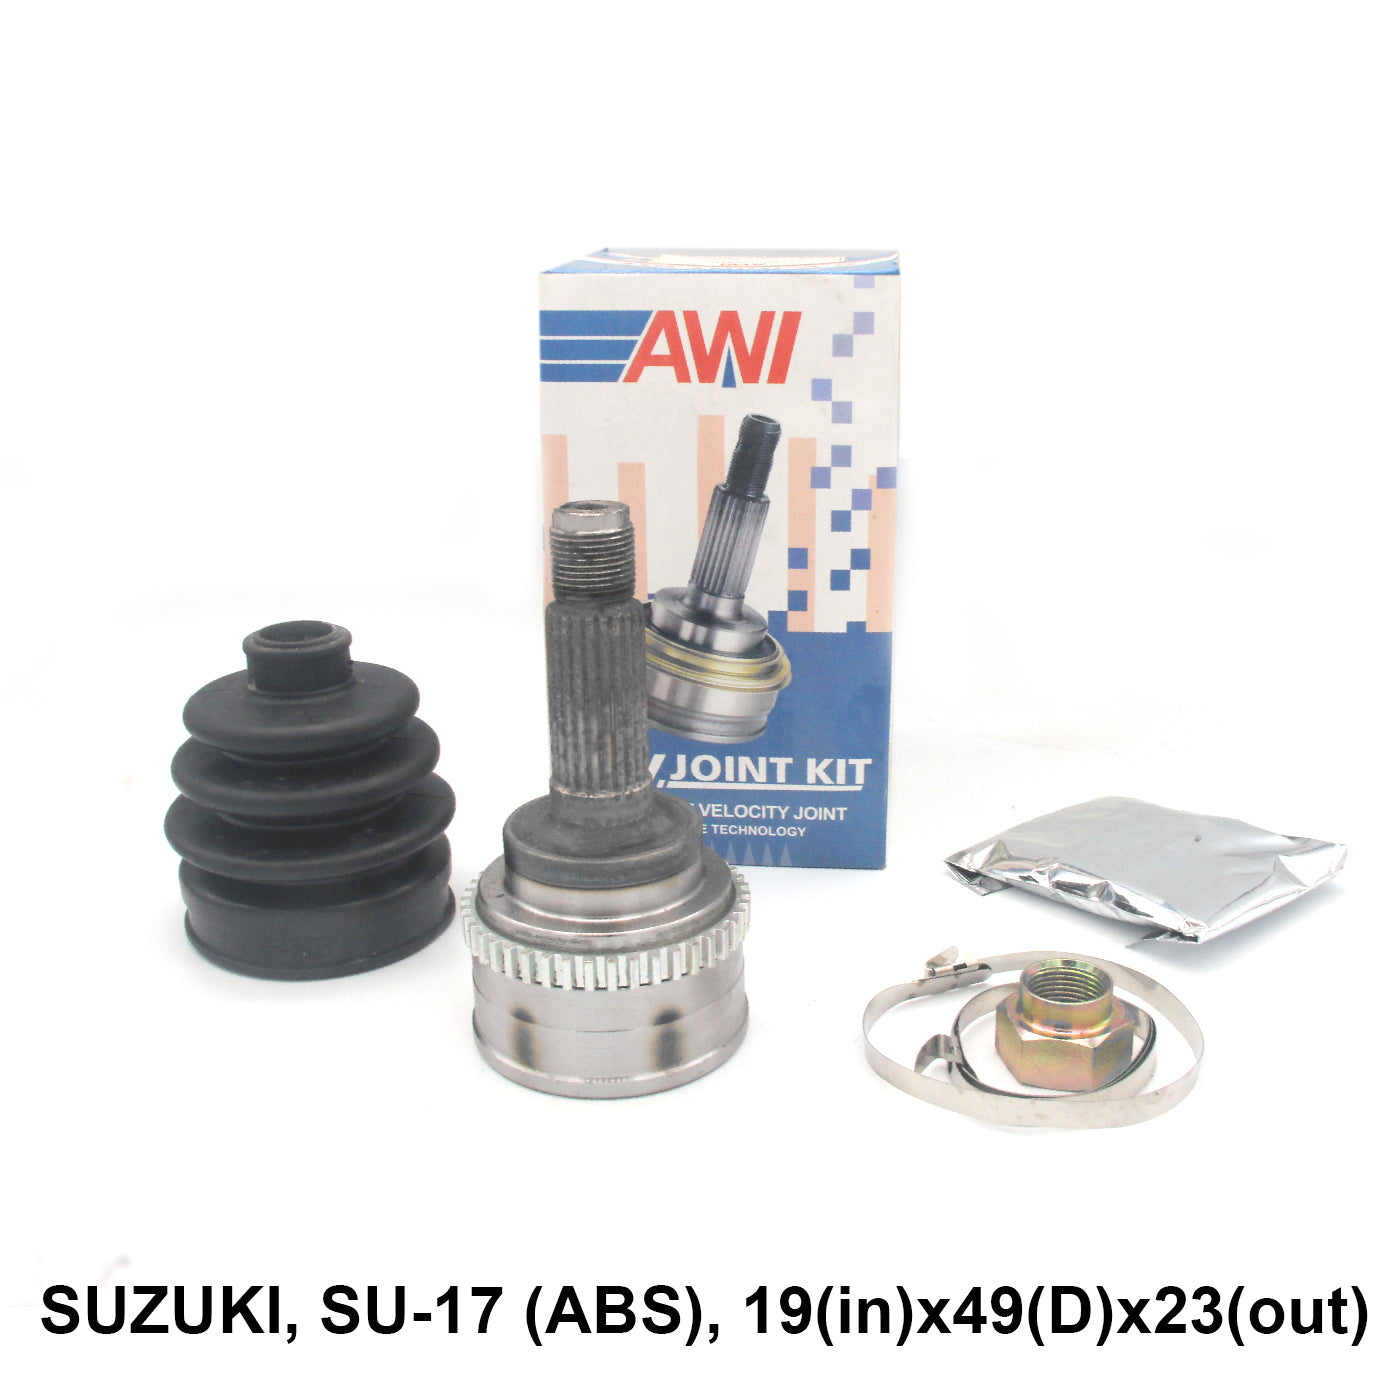 CV Joint, AWI, SU-17, 19(in)x23(D)x49(out) (006404)